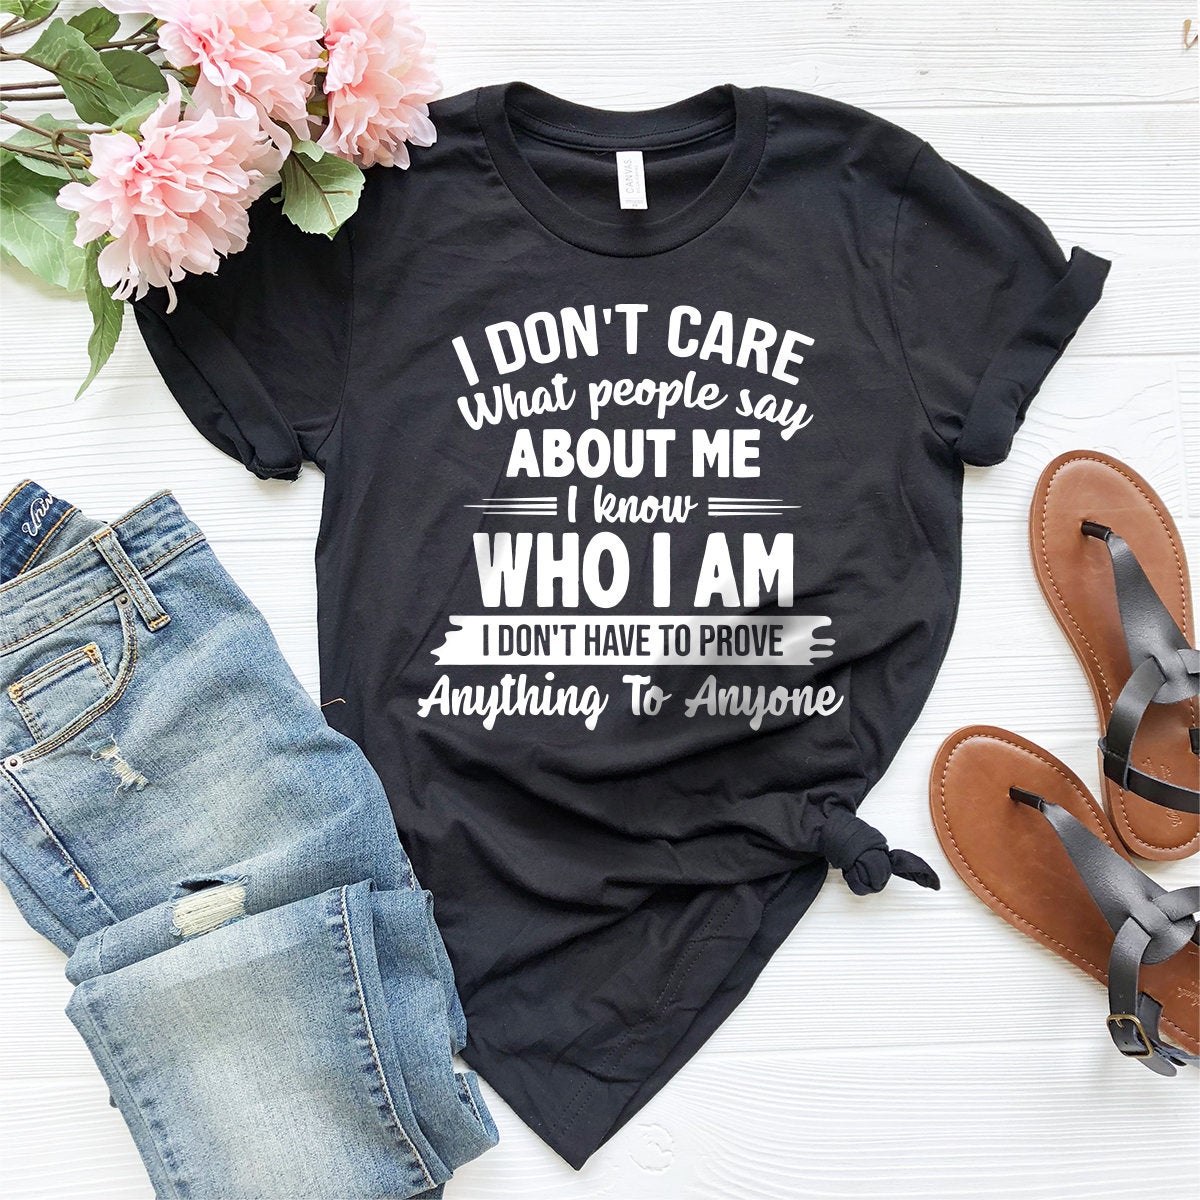 Motivational Quote Shirt, Inspirational Shirt, Positive Vibes Shirt, Motivation Shirt, I Don't Care What People Say About Me I Know Who Am I - Fastdeliverytees.com